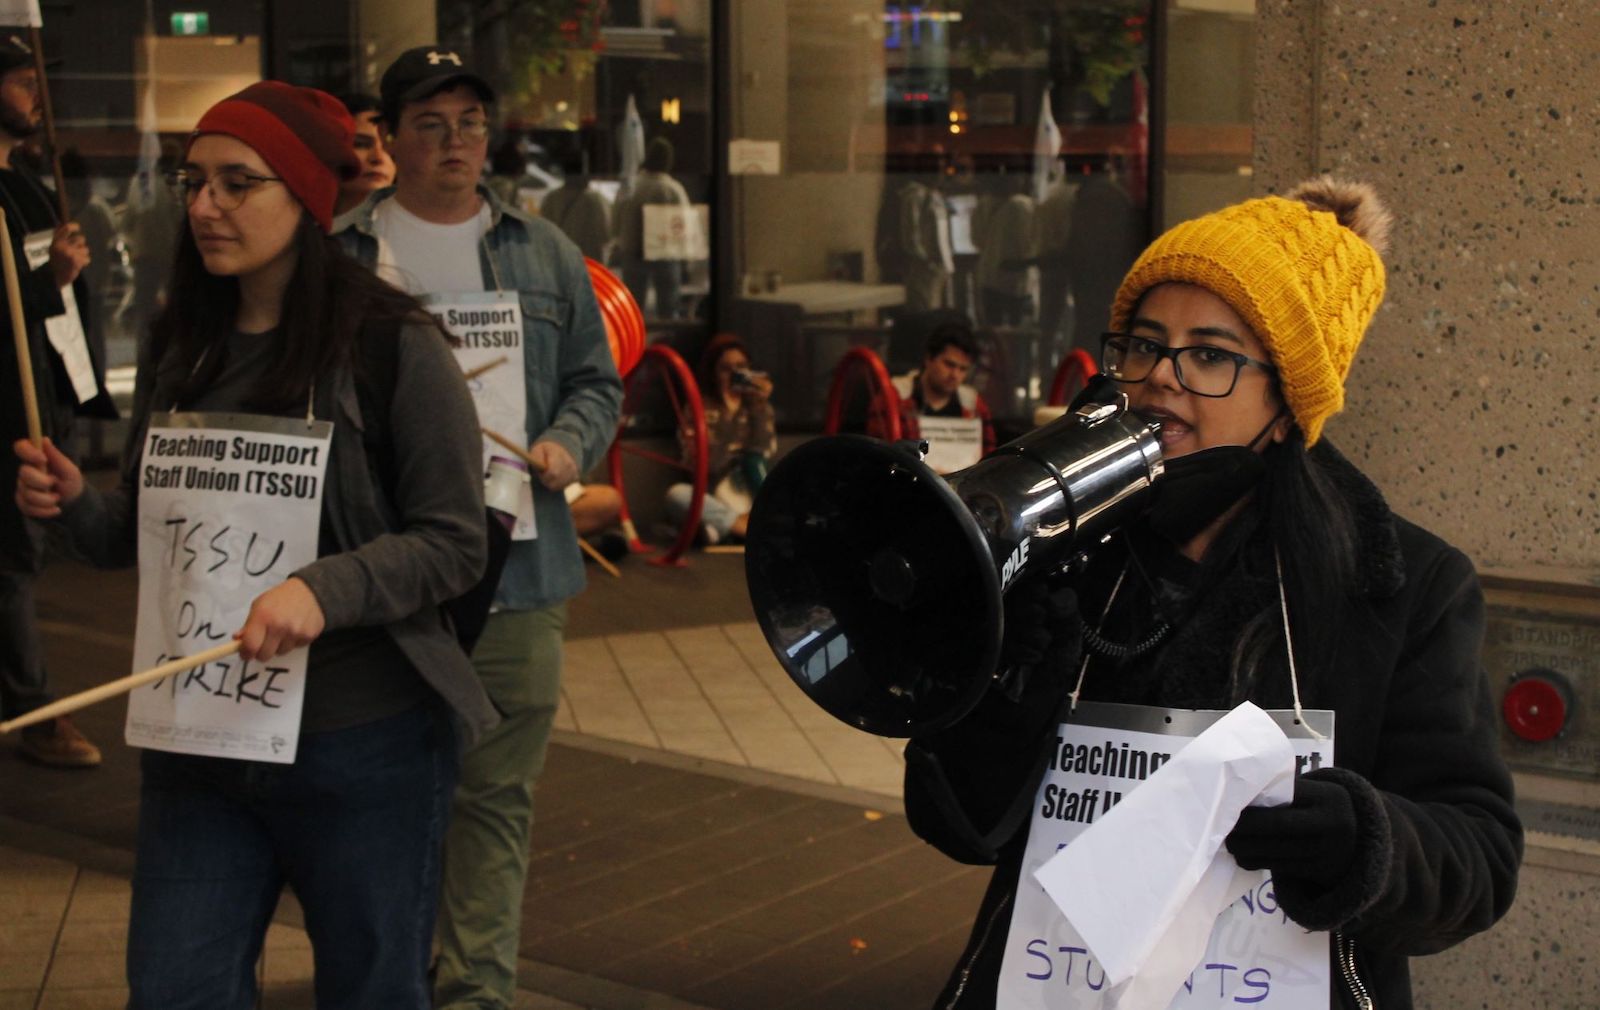 In the foreground, a woman in a yellow toque and glasses speaks into a megaphone. To her right, another woman holding a drumstick in each hand wears a red toque, glasses and a sign that reads “Teaching Support Staff Union: TSSU on strike.” More picketers can be seen in the background.